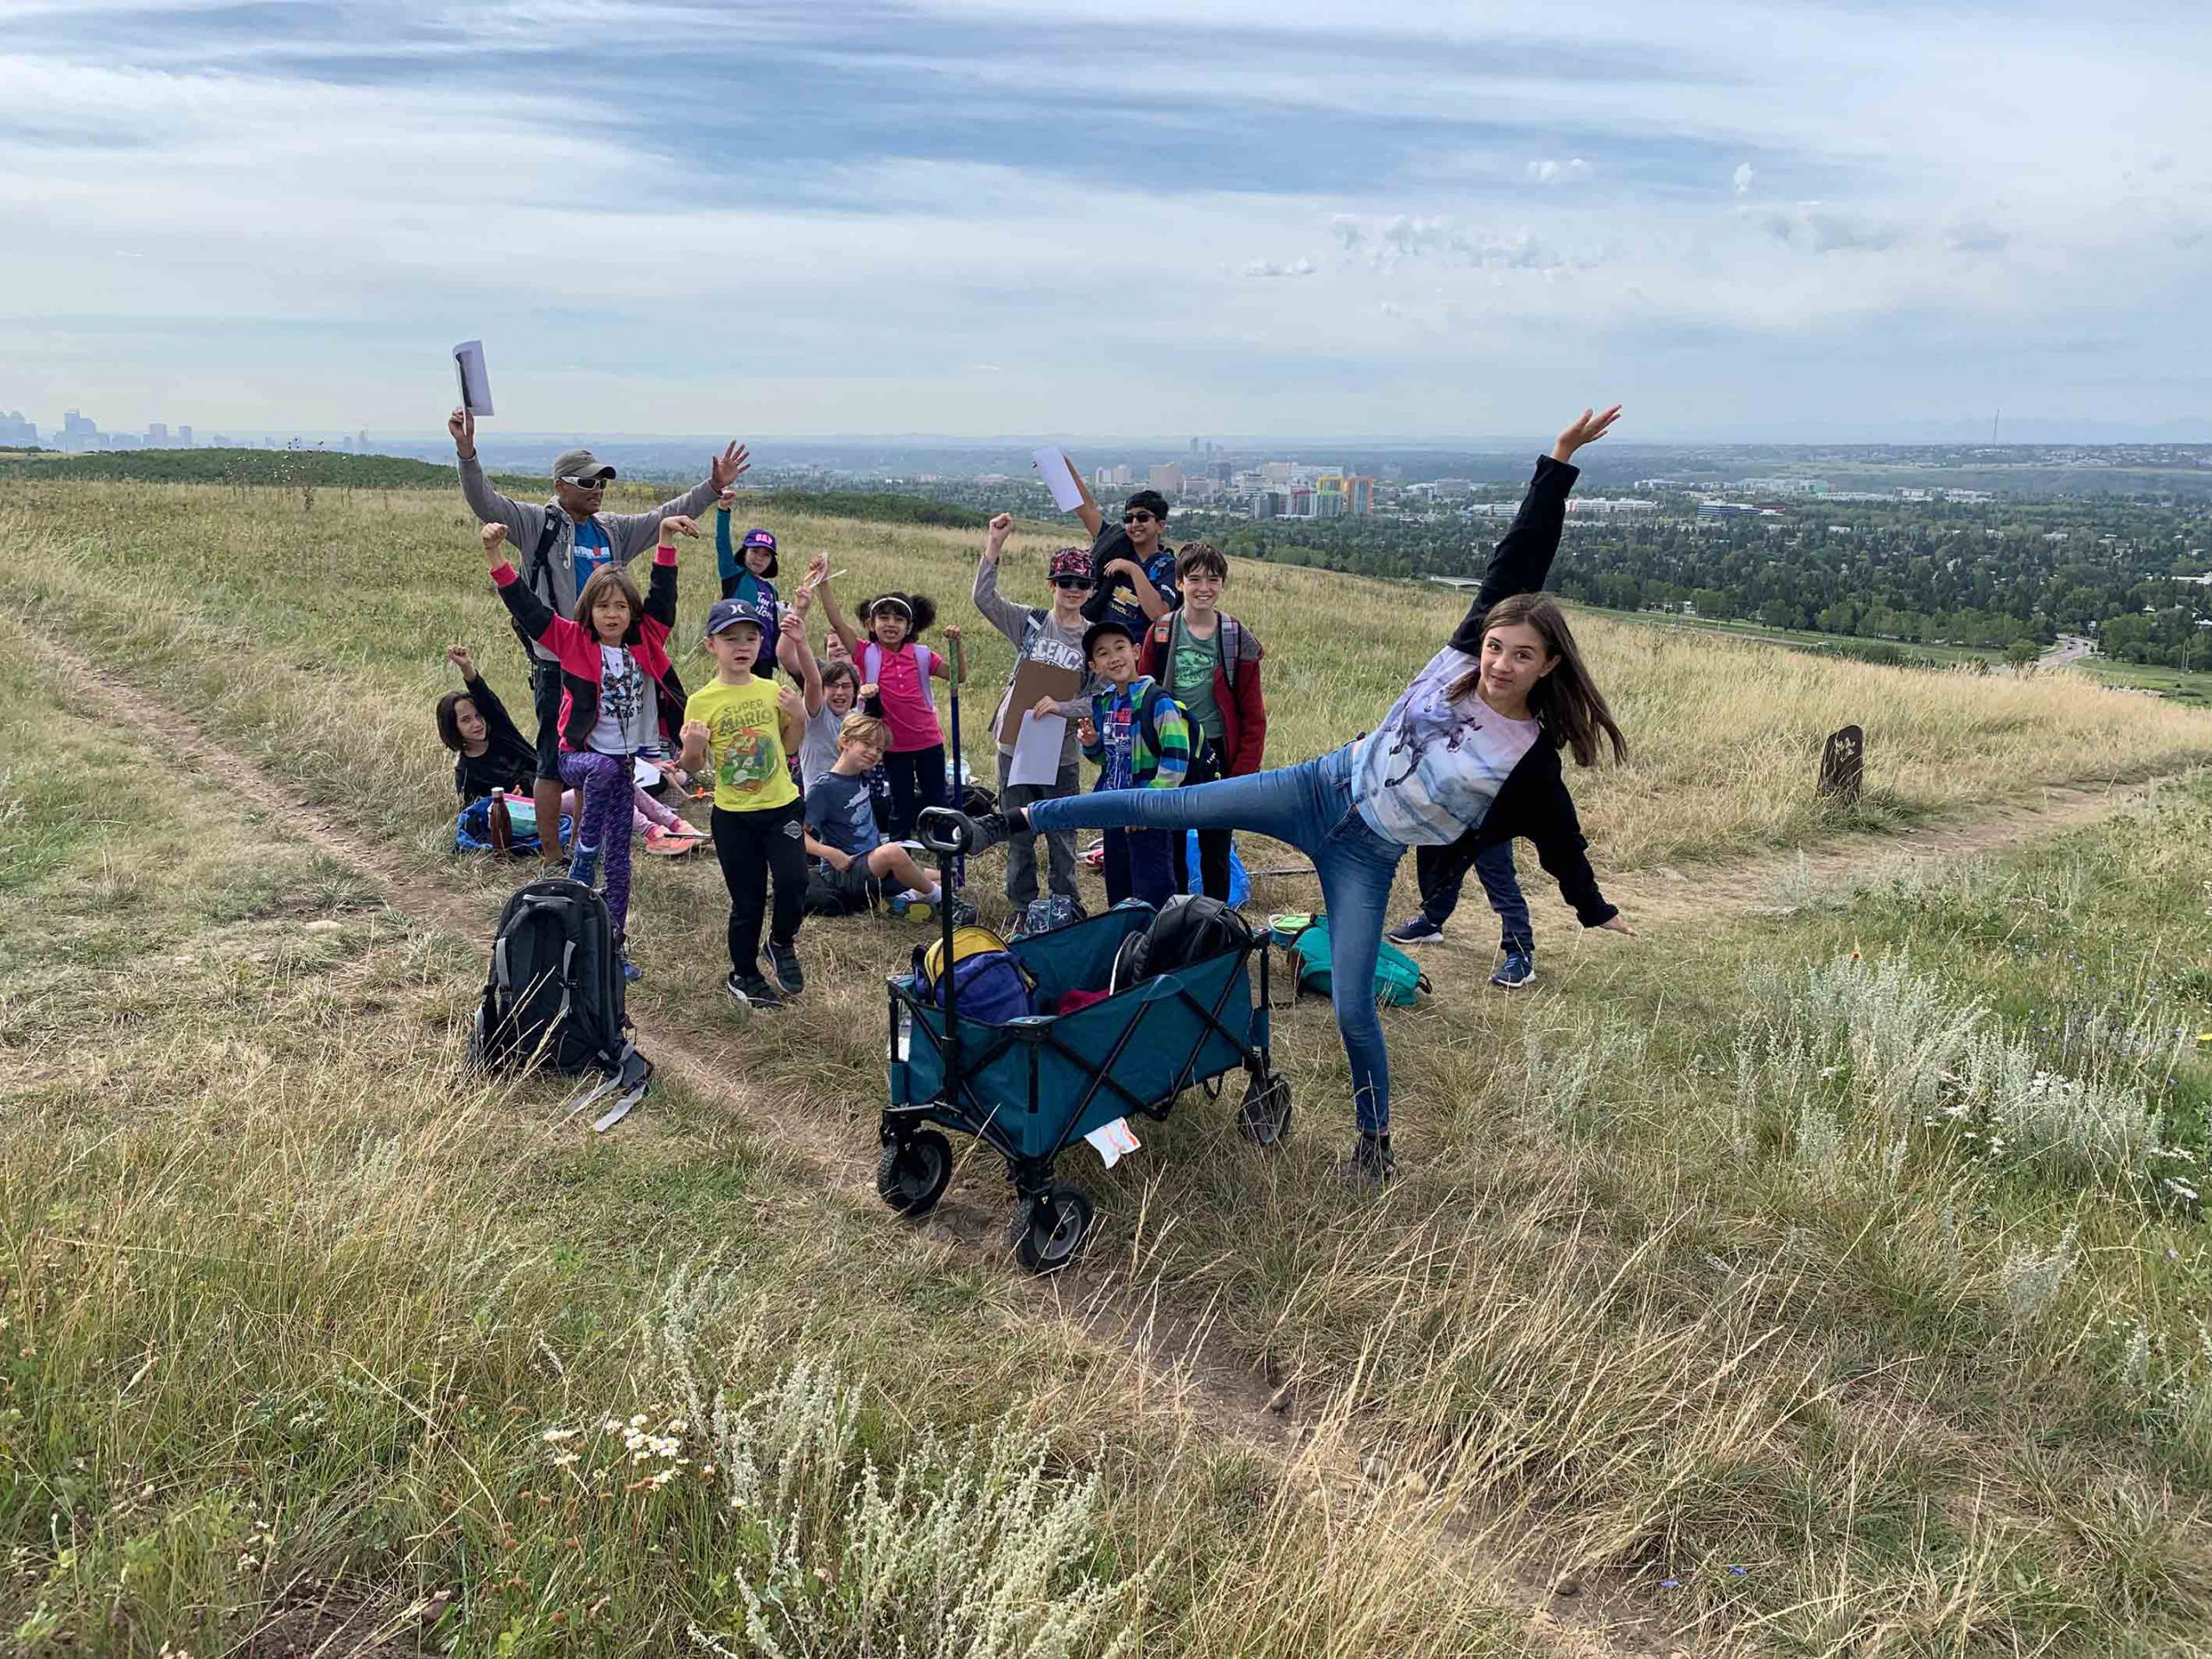 Banbury students on a field trip to Nose Hill posing for a picture by raising their arms